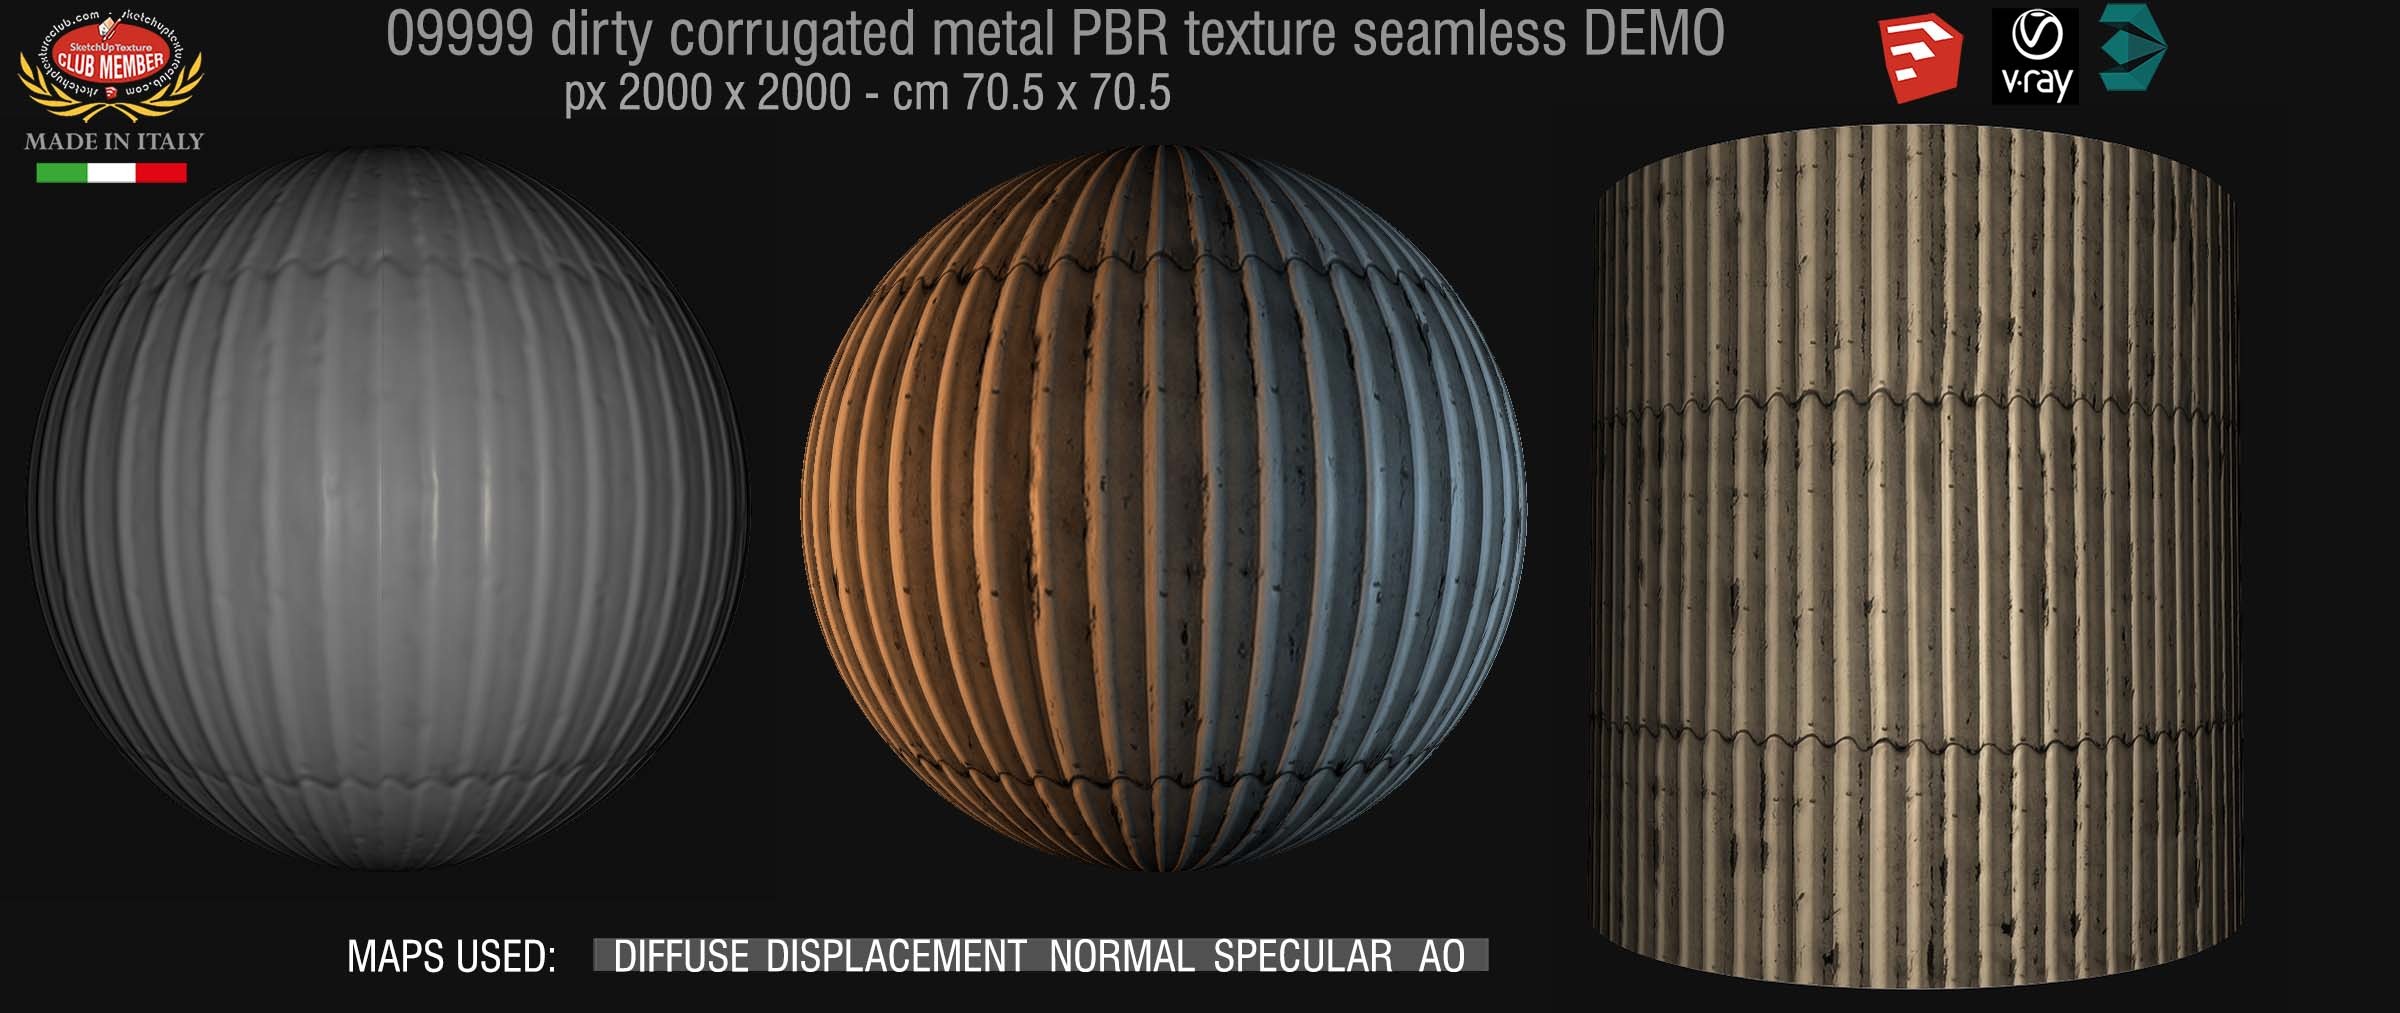 09999 Dirty corrugated metal PBR texture seamless DEMO